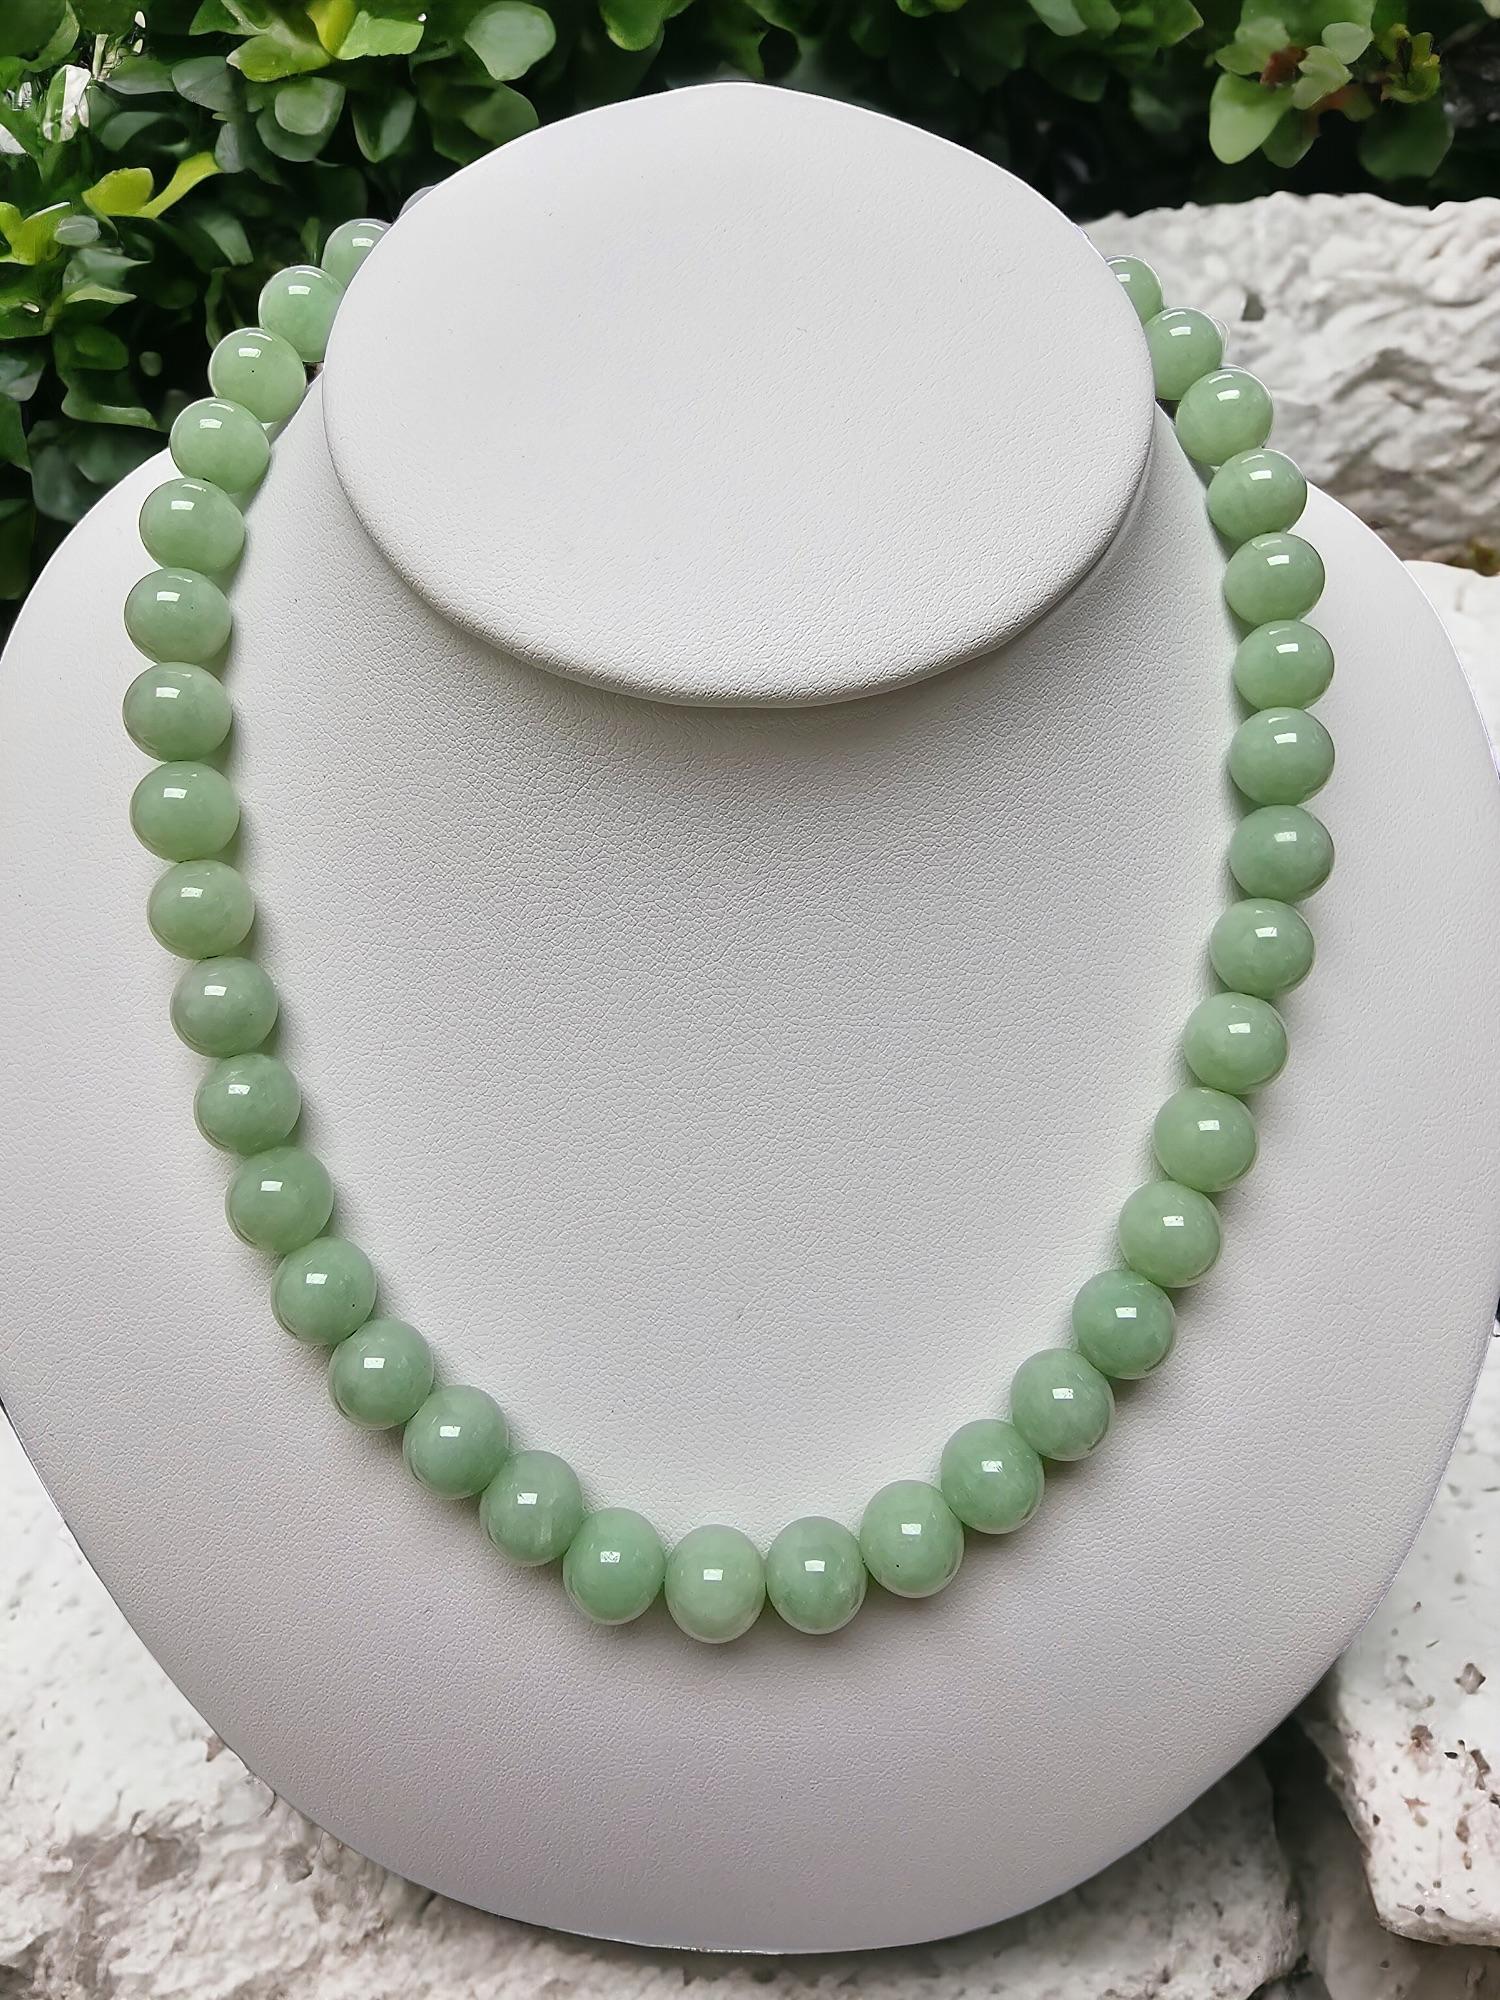 Imperial Green Burmese A-Jade Beaded Necklace (10mm Each x 42 beads) 10001 For Sale 4